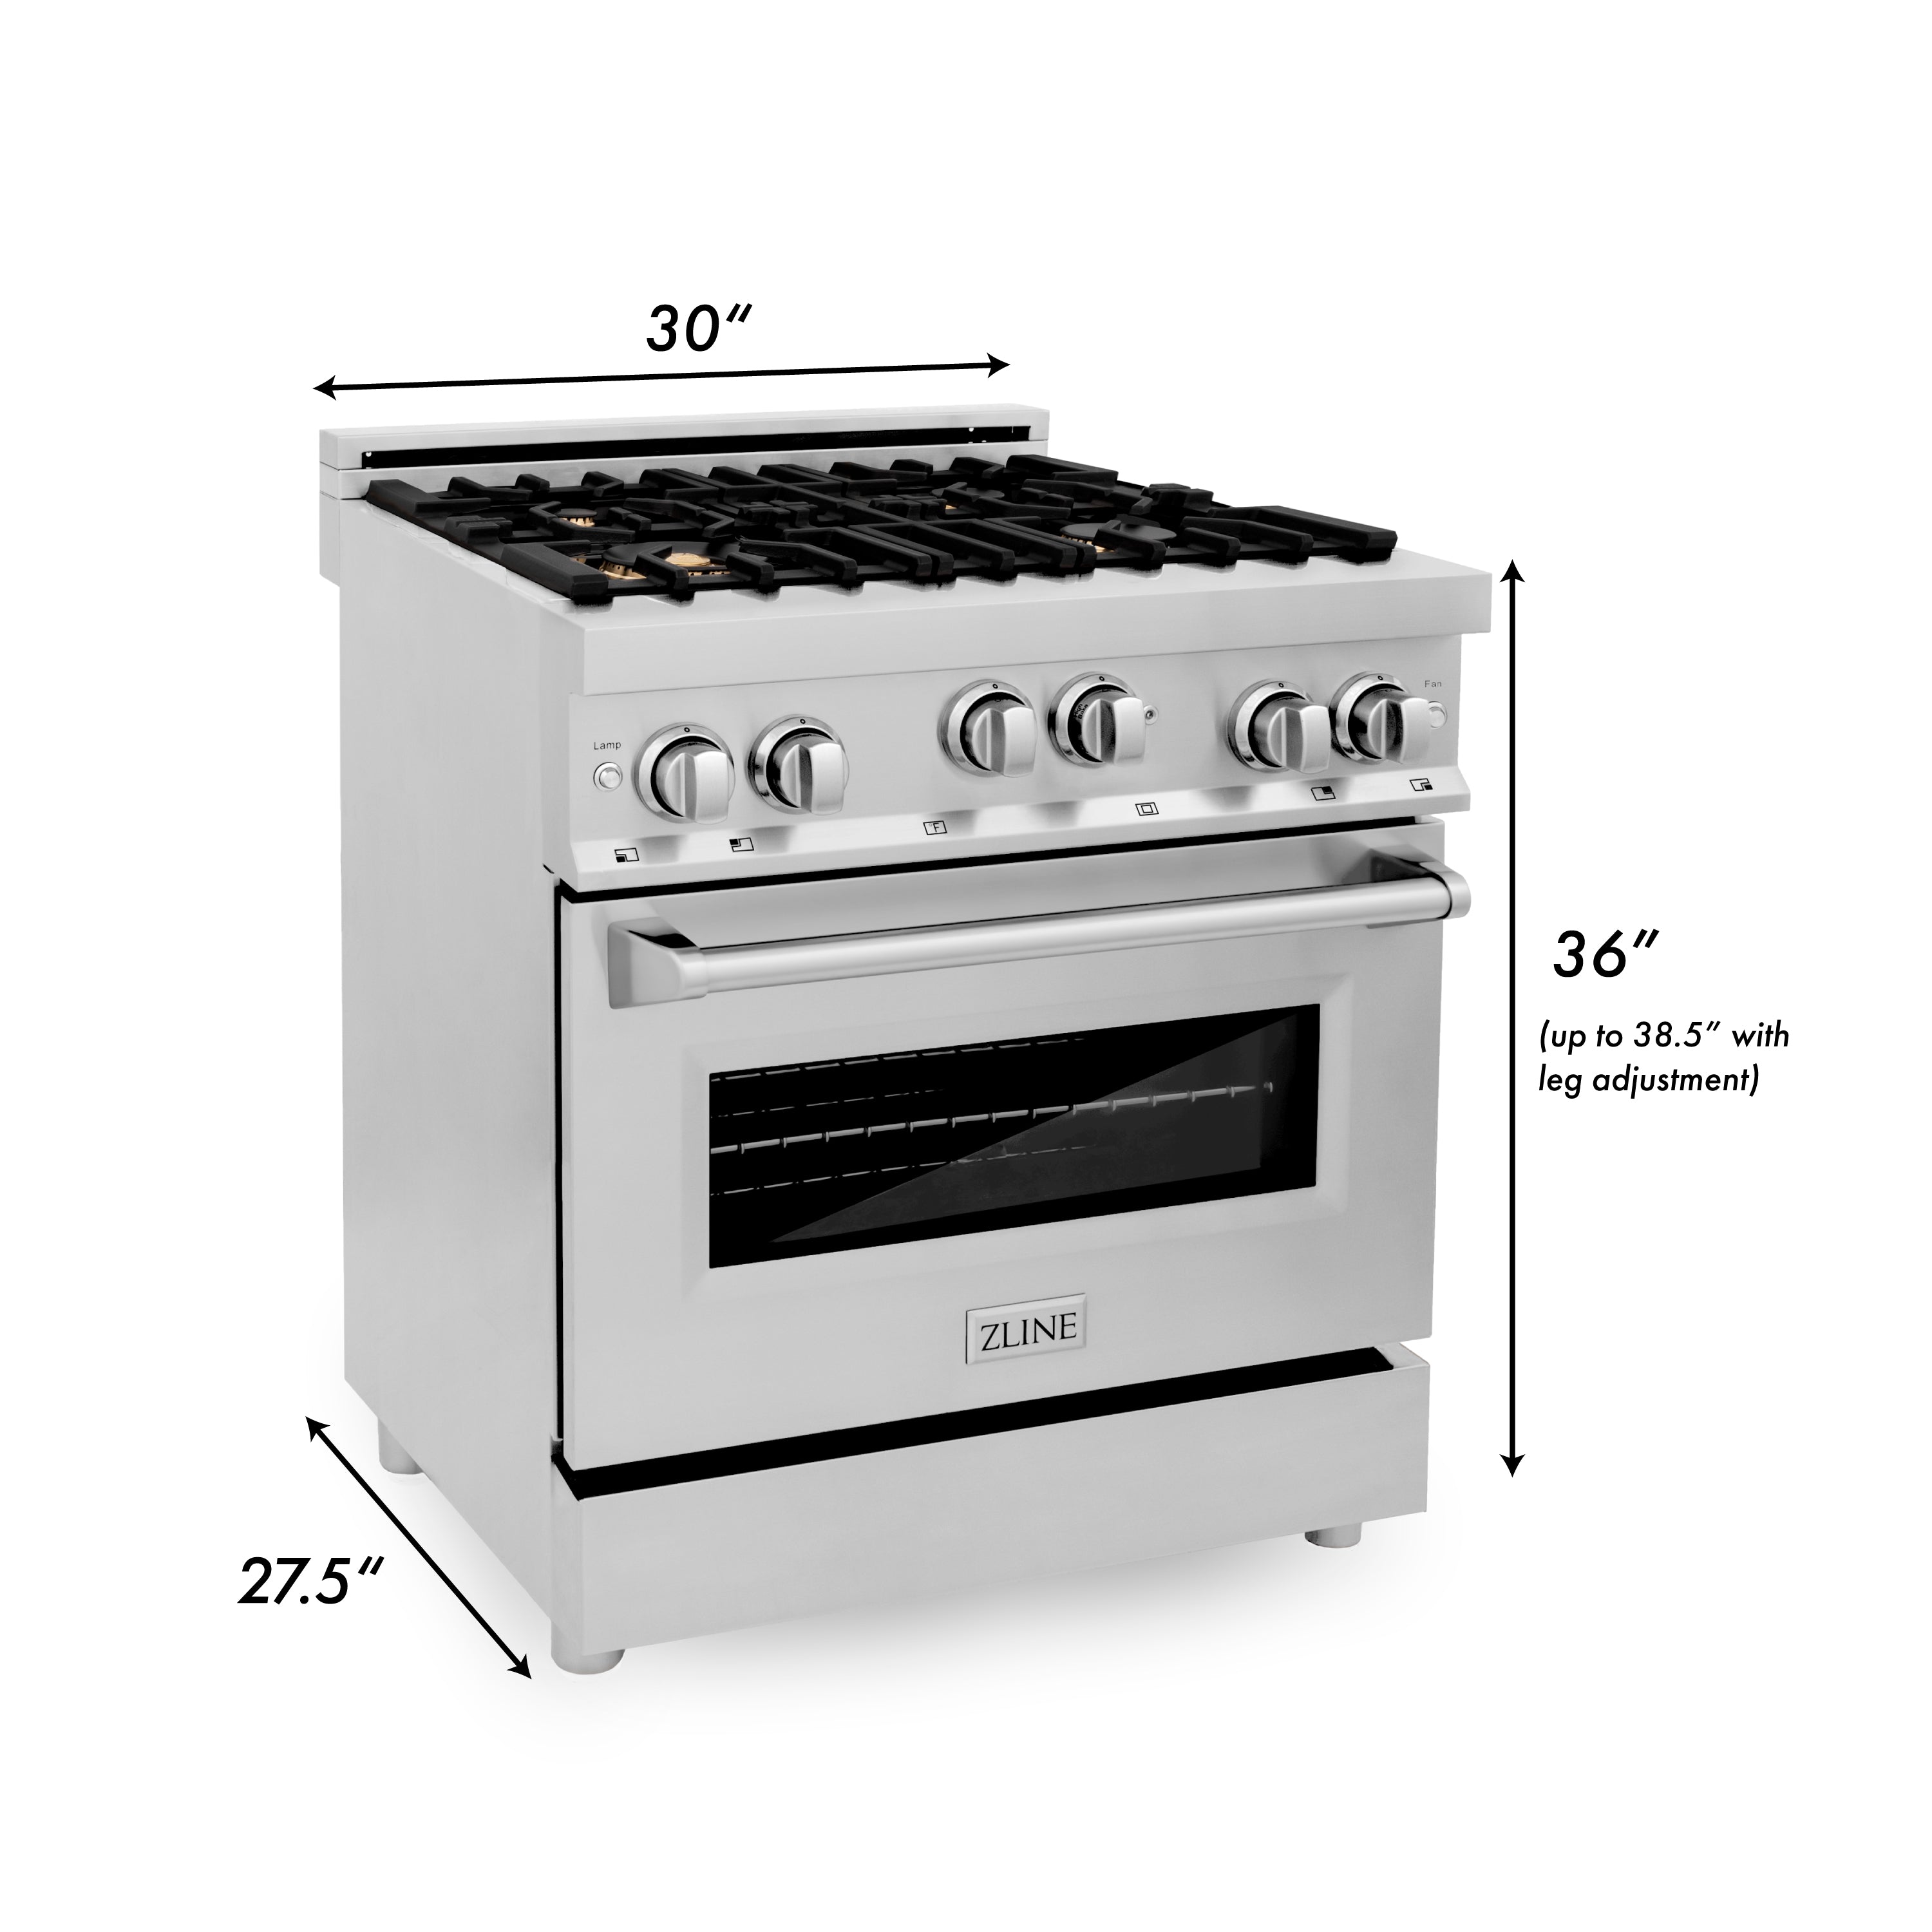 ZLINE 30 in. 4.0 cu. ft. Gas Oven and Gas Cooktop Range with Griddle and Brass Burners in Stainless Steel (RG-BR-GR-30)